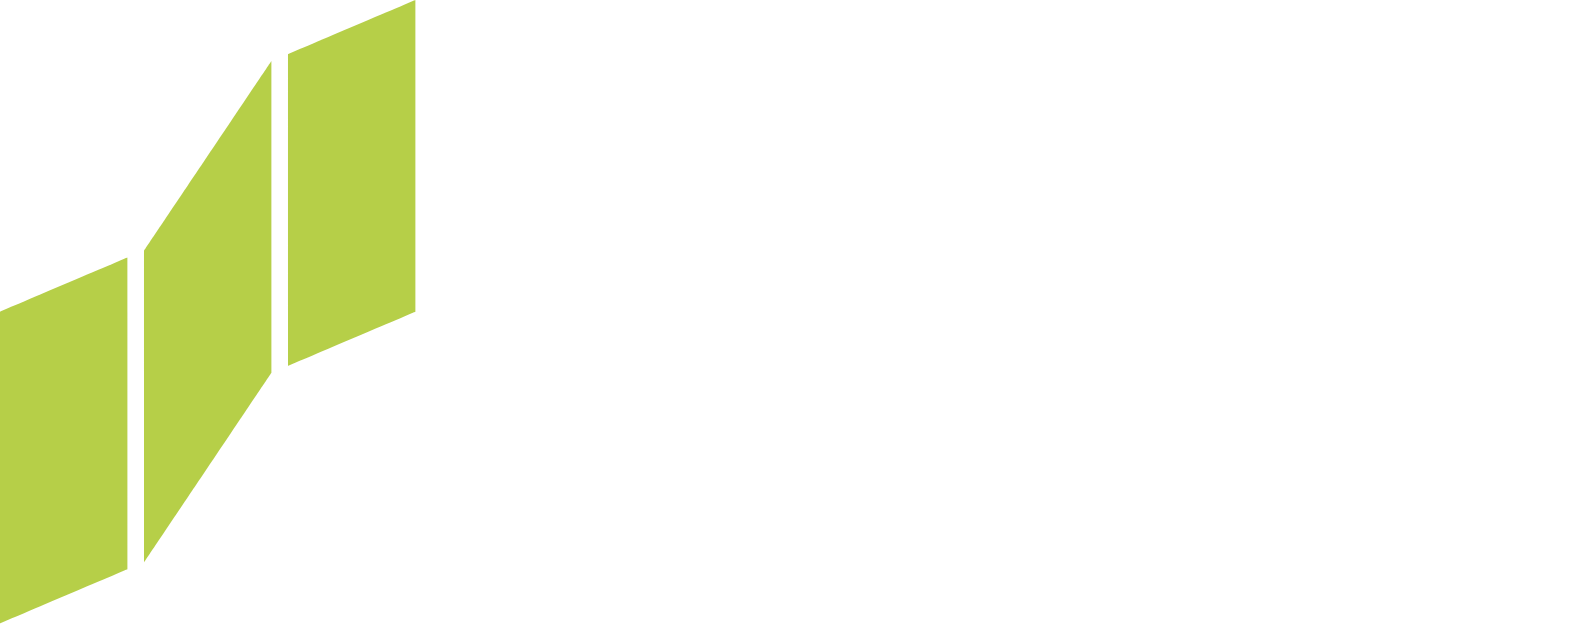 Sumitomo Mitsui Financial Group logo large for dark backgrounds (transparent PNG)